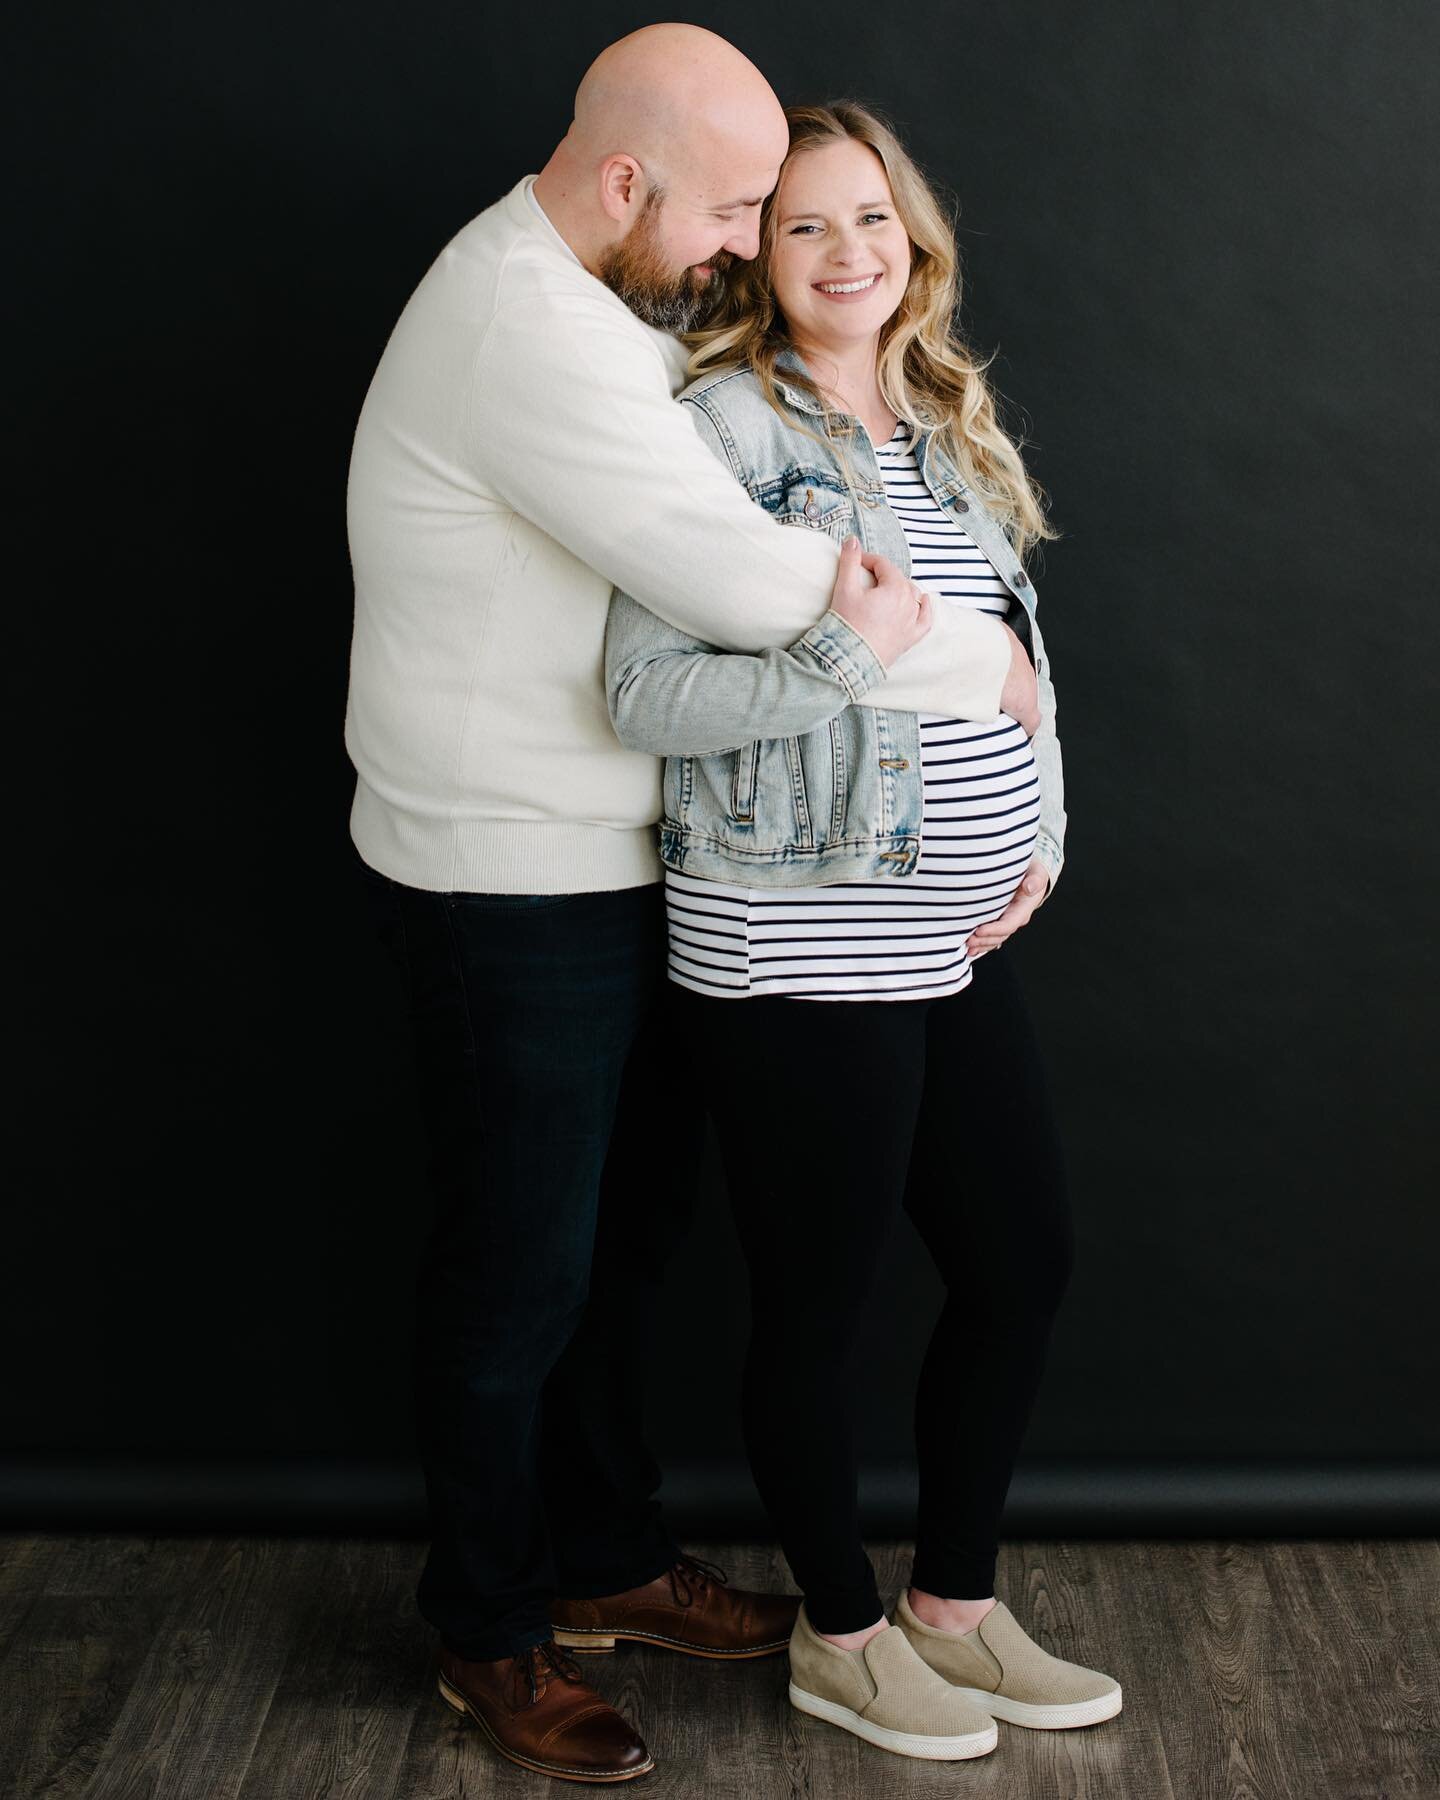 These two (three!) babes made studio sessions look really good. Who is interested in booking a studio session together? 
Outdoor sessions are glorious, but we all know the Midwestern weather can be unpredictable. Studio sessions allow for gorgeous na